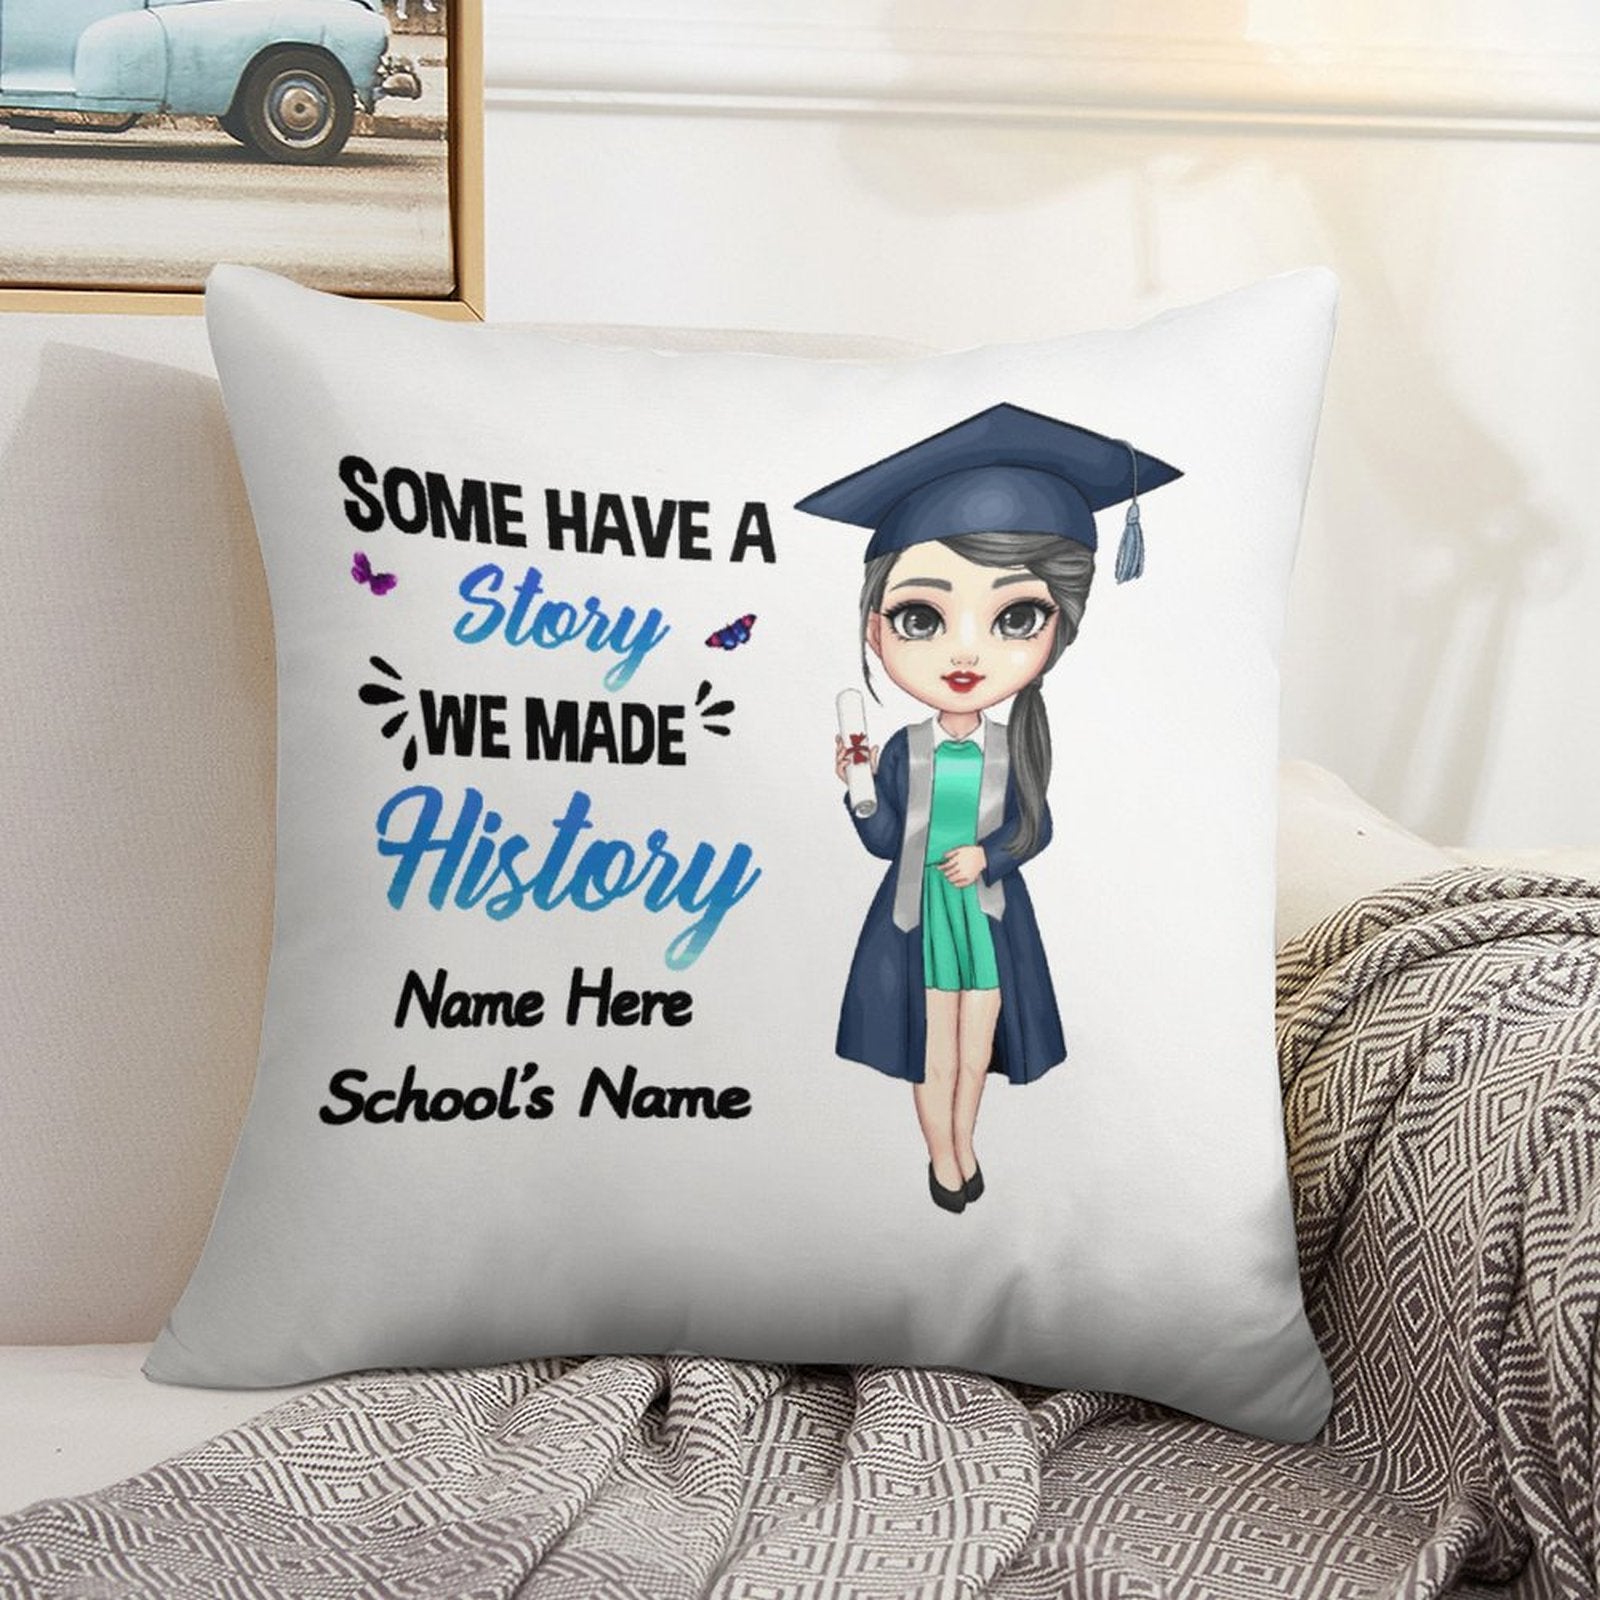 Celebrate Graduation Pillow Covers, Square Throw Pillow Covers Cozy Cushion Cases For Sofa Living Room, Graduation Gifts For School Leavers - colorfulcustom